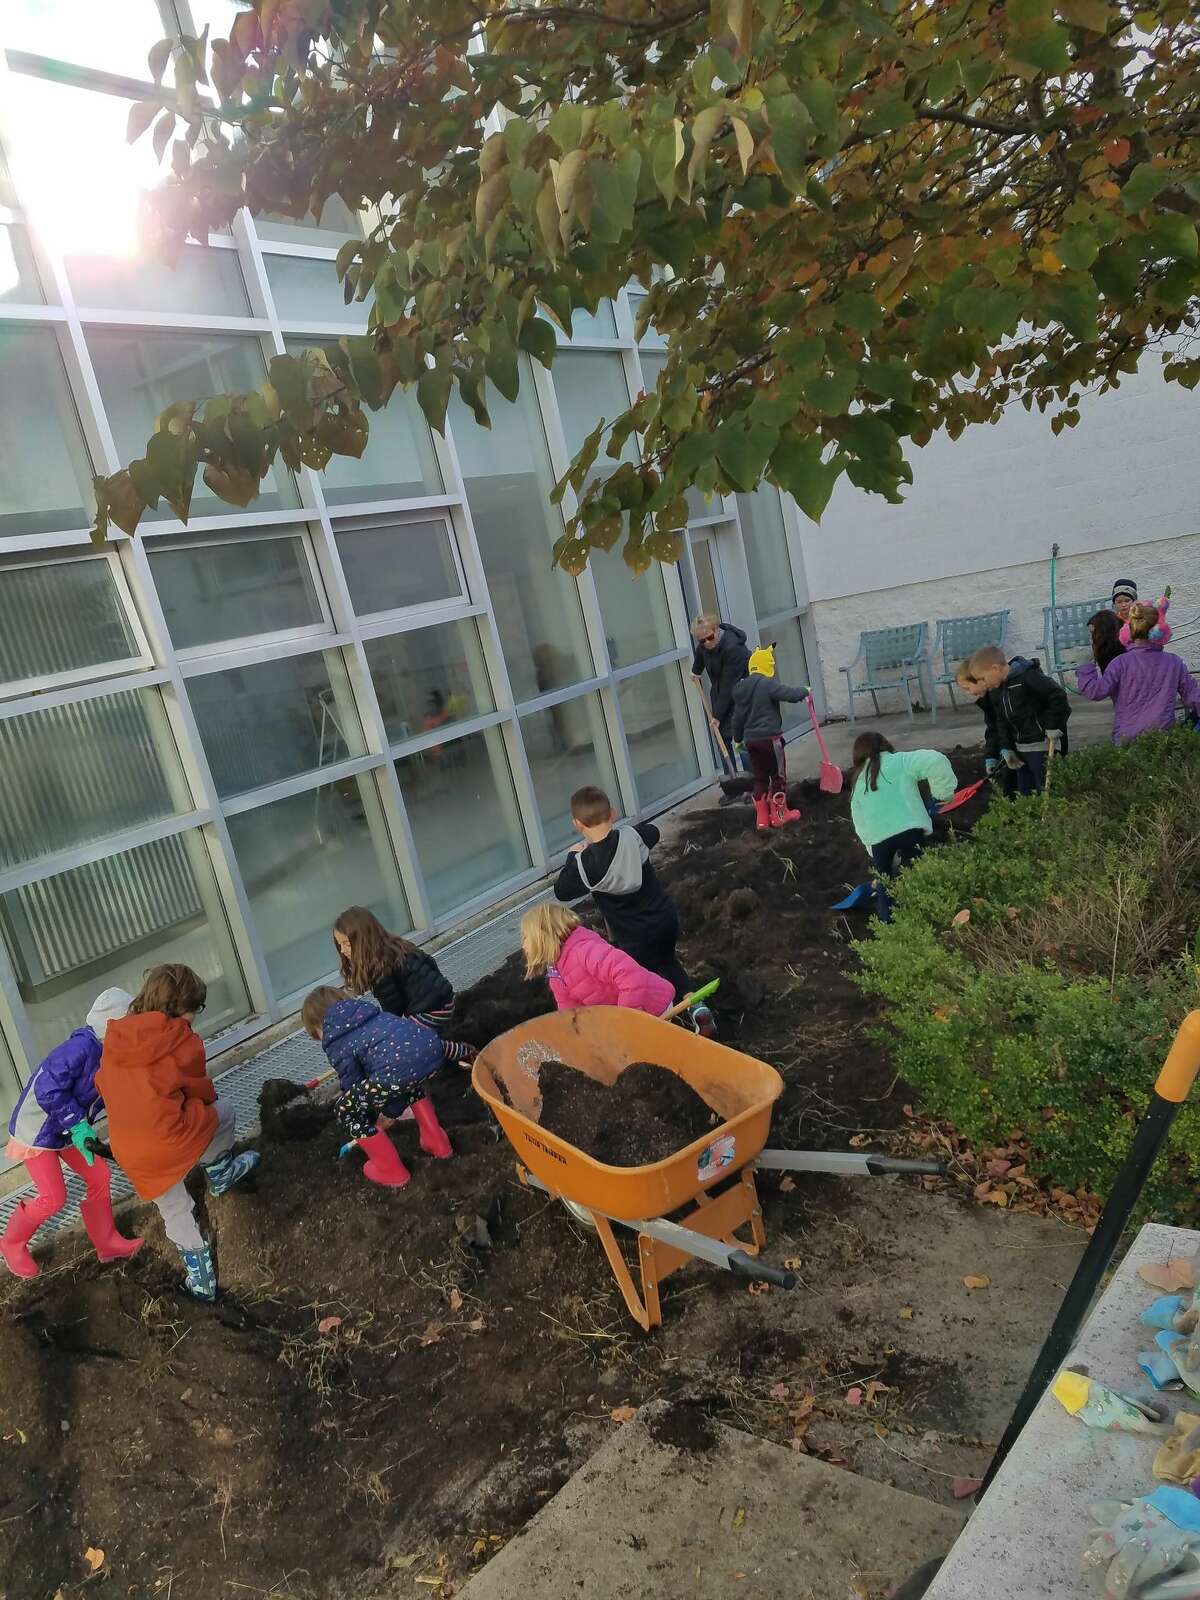 Ridgebury Elementary School students pitched in to help clean up their school's courtyard.